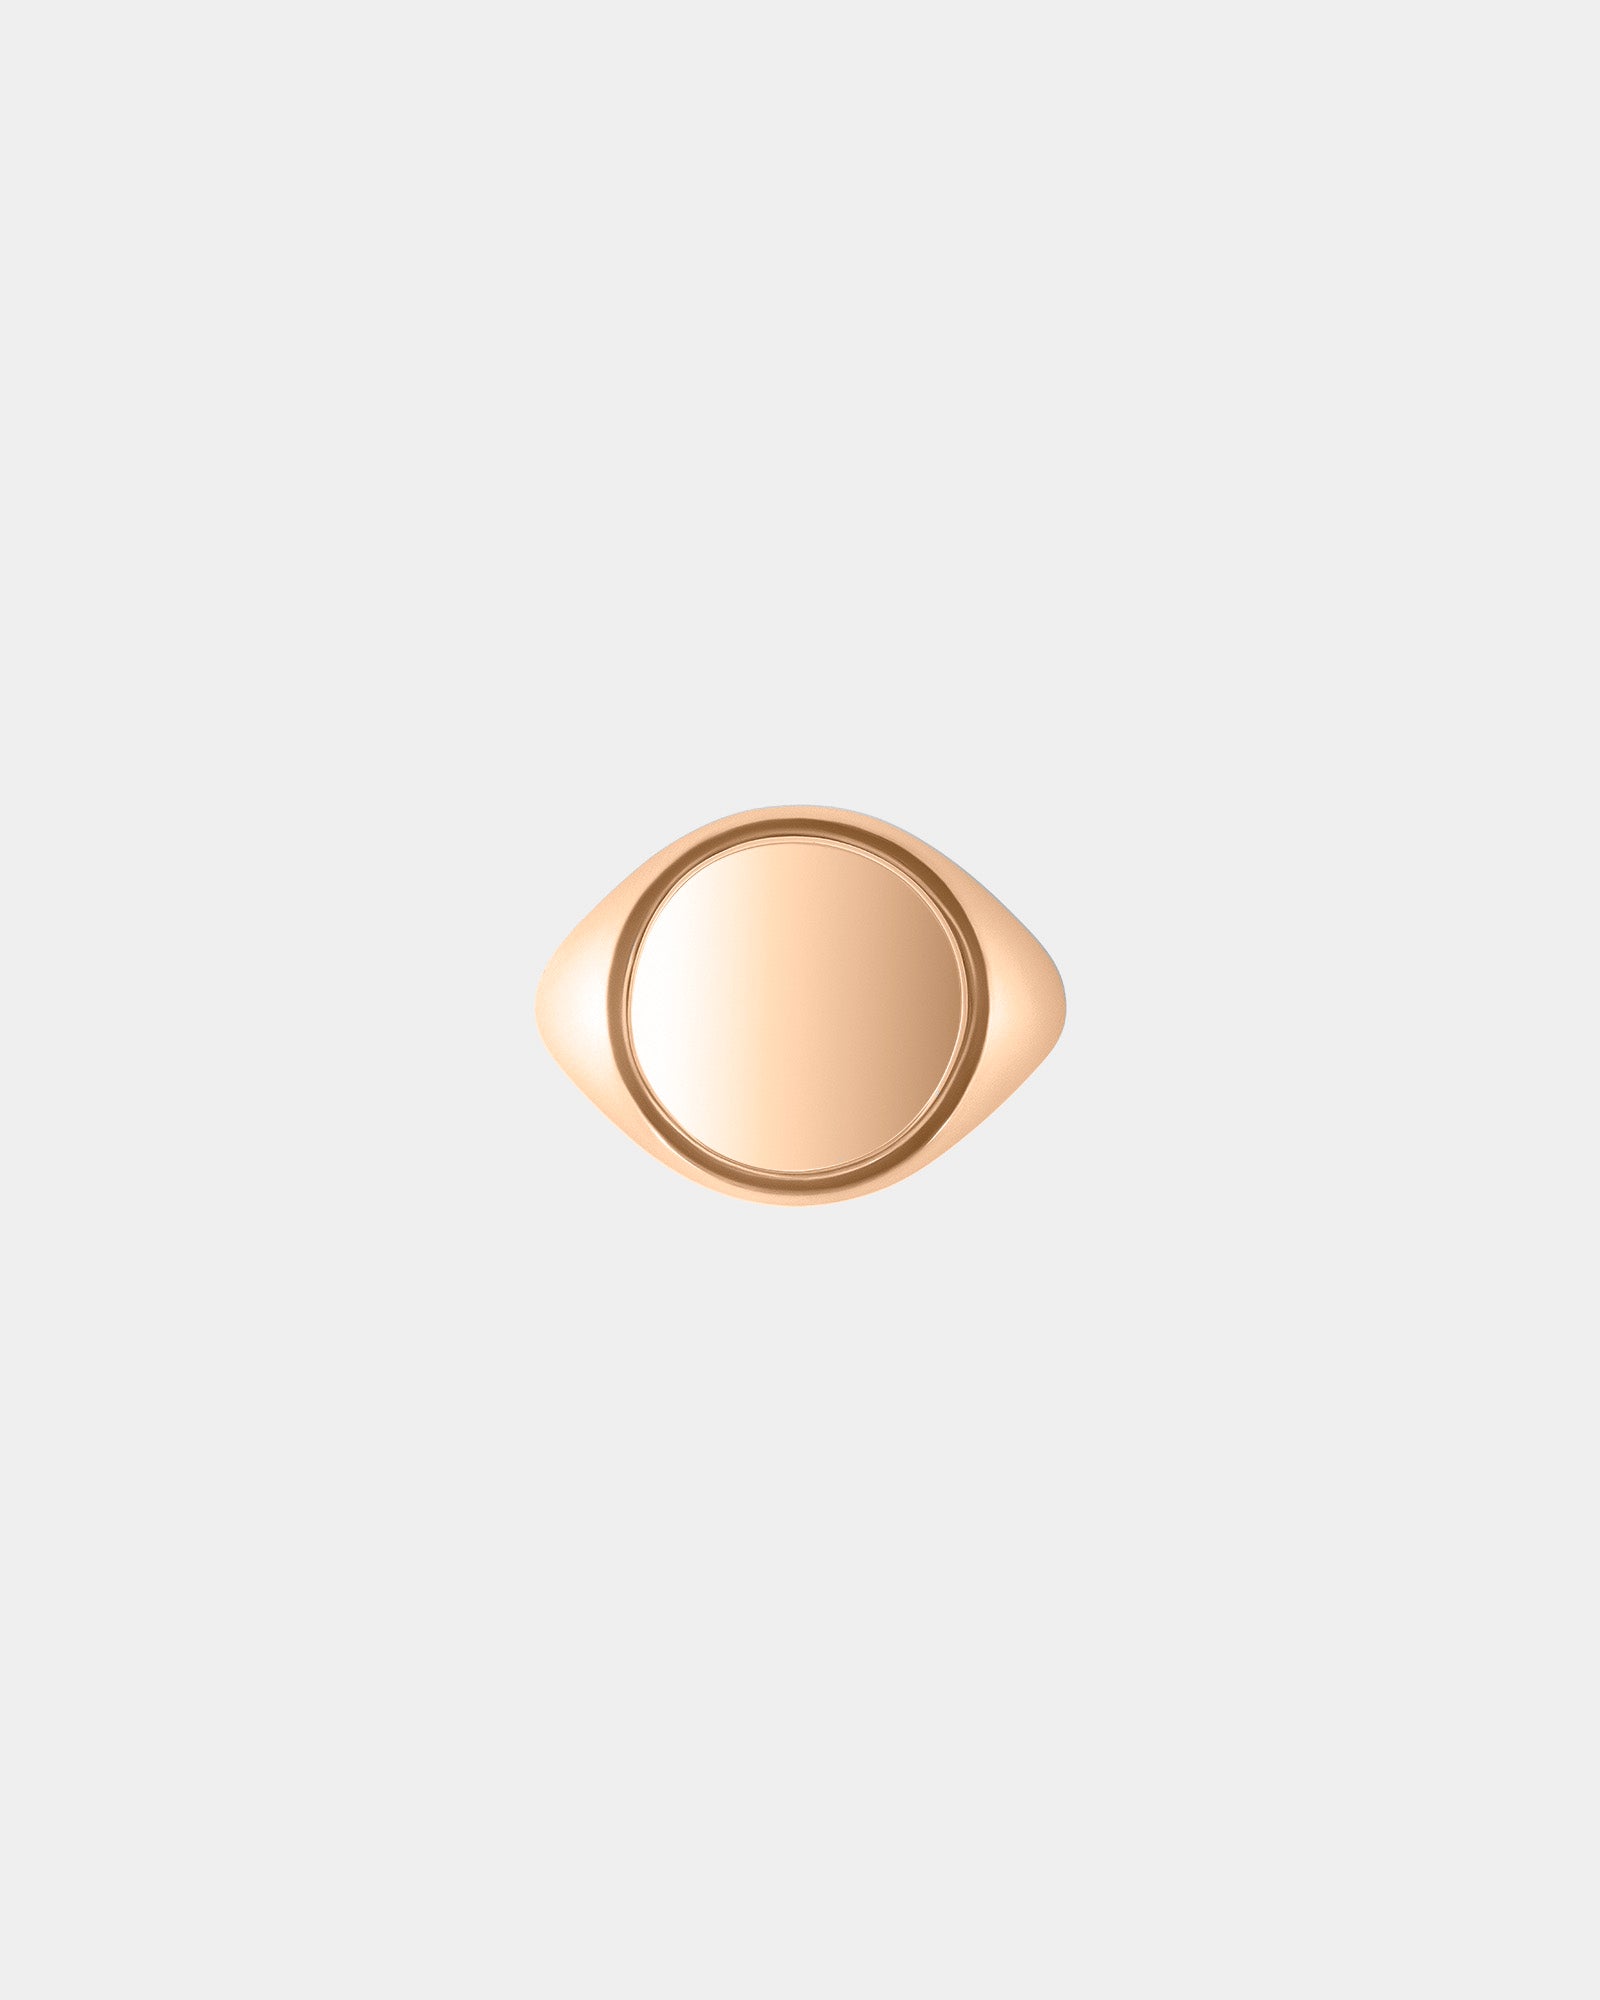 Large Round Signet Ring in 9k Rose Gold by Wilson Grant